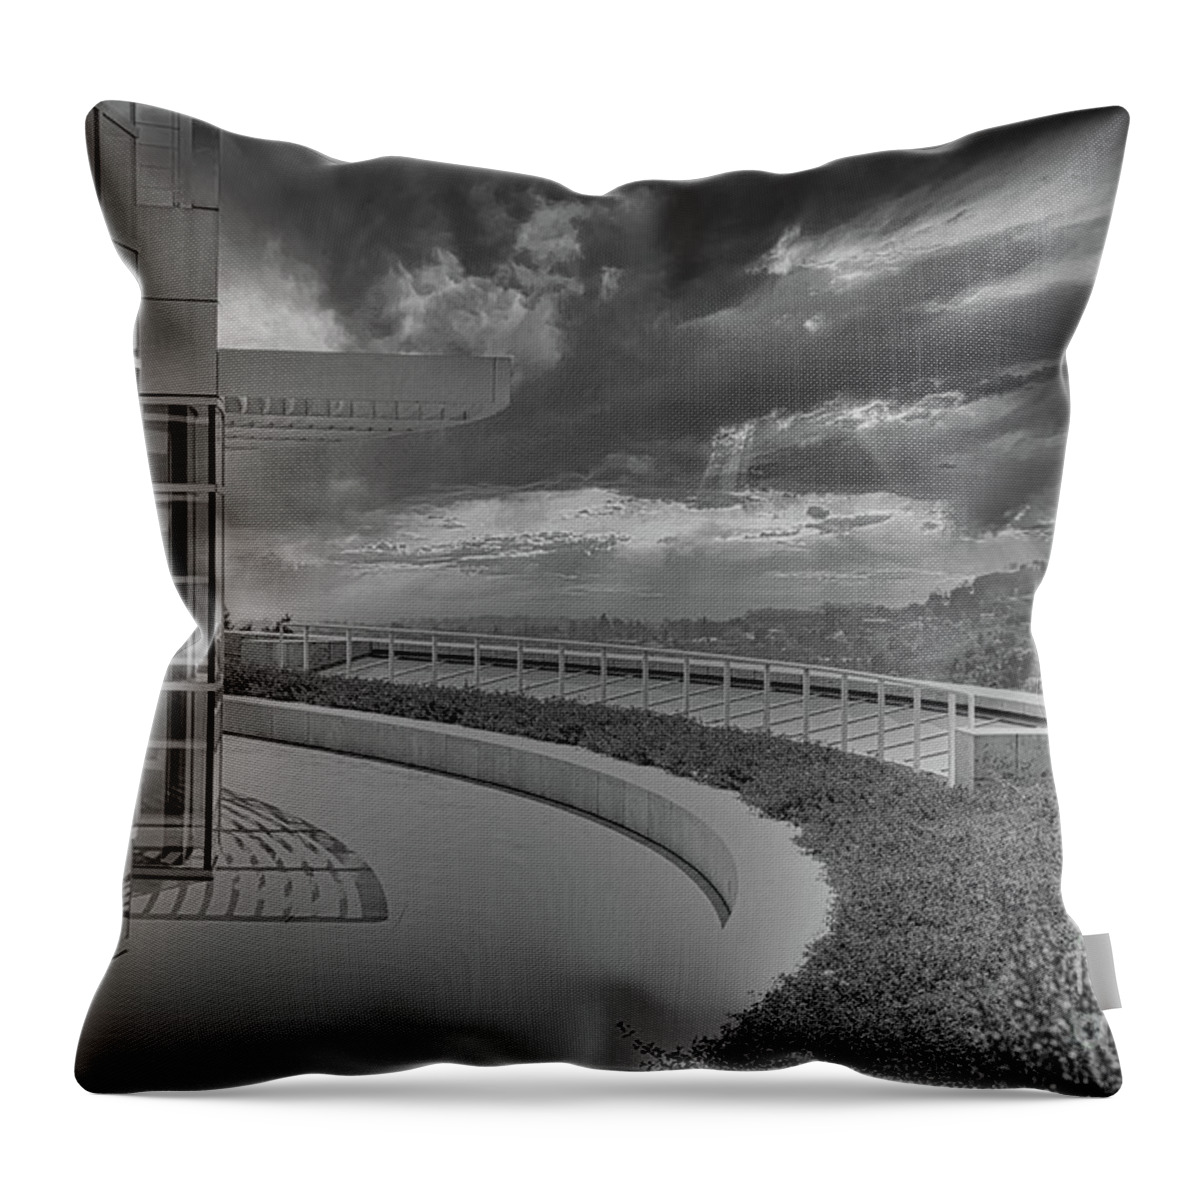 Getty Museum Throw Pillow featuring the photograph The Getty Architecture Black White Los Angeles by Chuck Kuhn